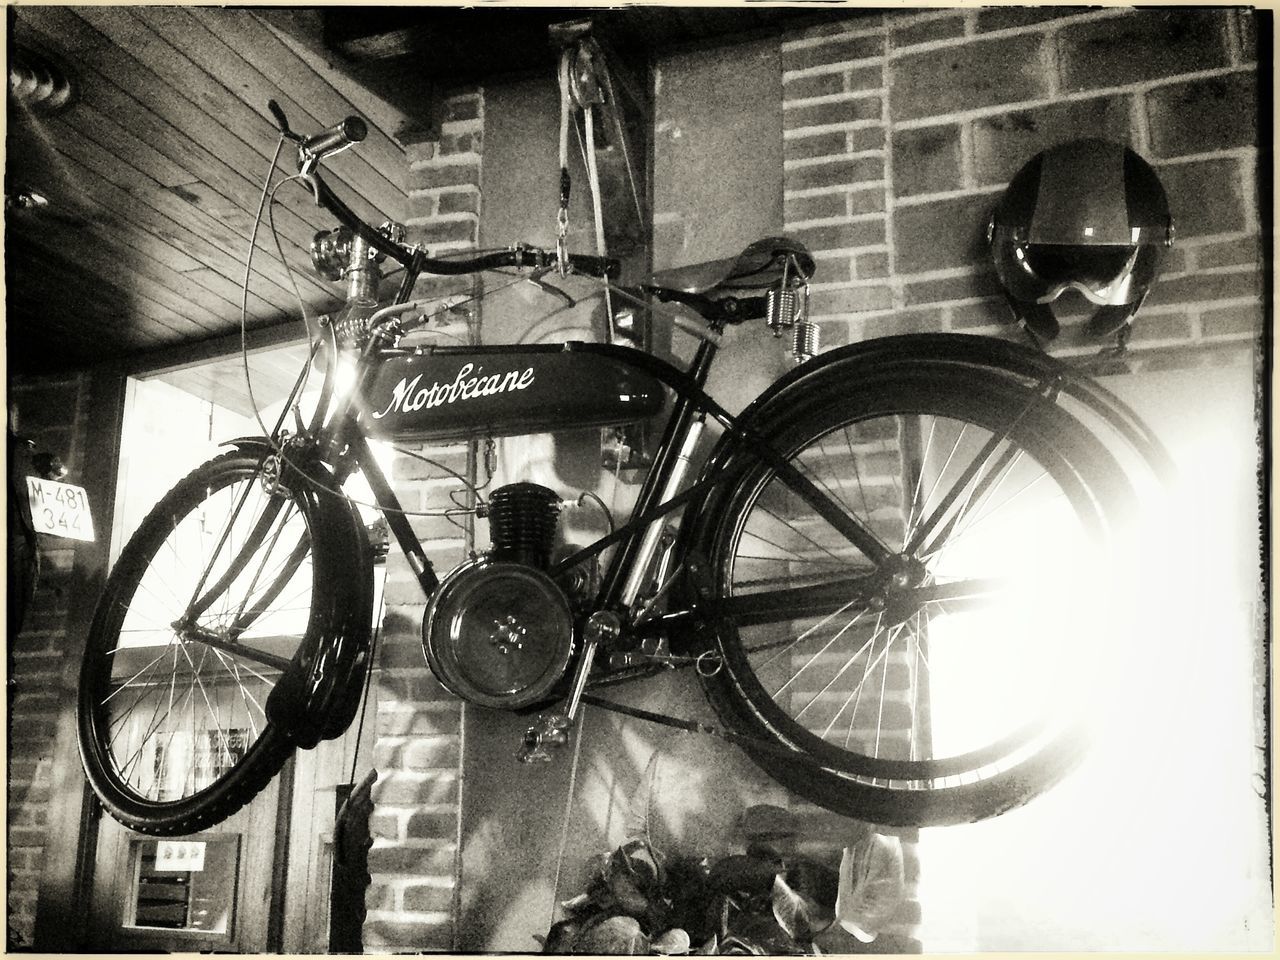 bicycle, architecture, mode of transport, built structure, transportation, indoors, land vehicle, transfer print, stationary, parking, auto post production filter, parked, building exterior, wall - building feature, wheel, day, city, sunlight, no people, motorcycle